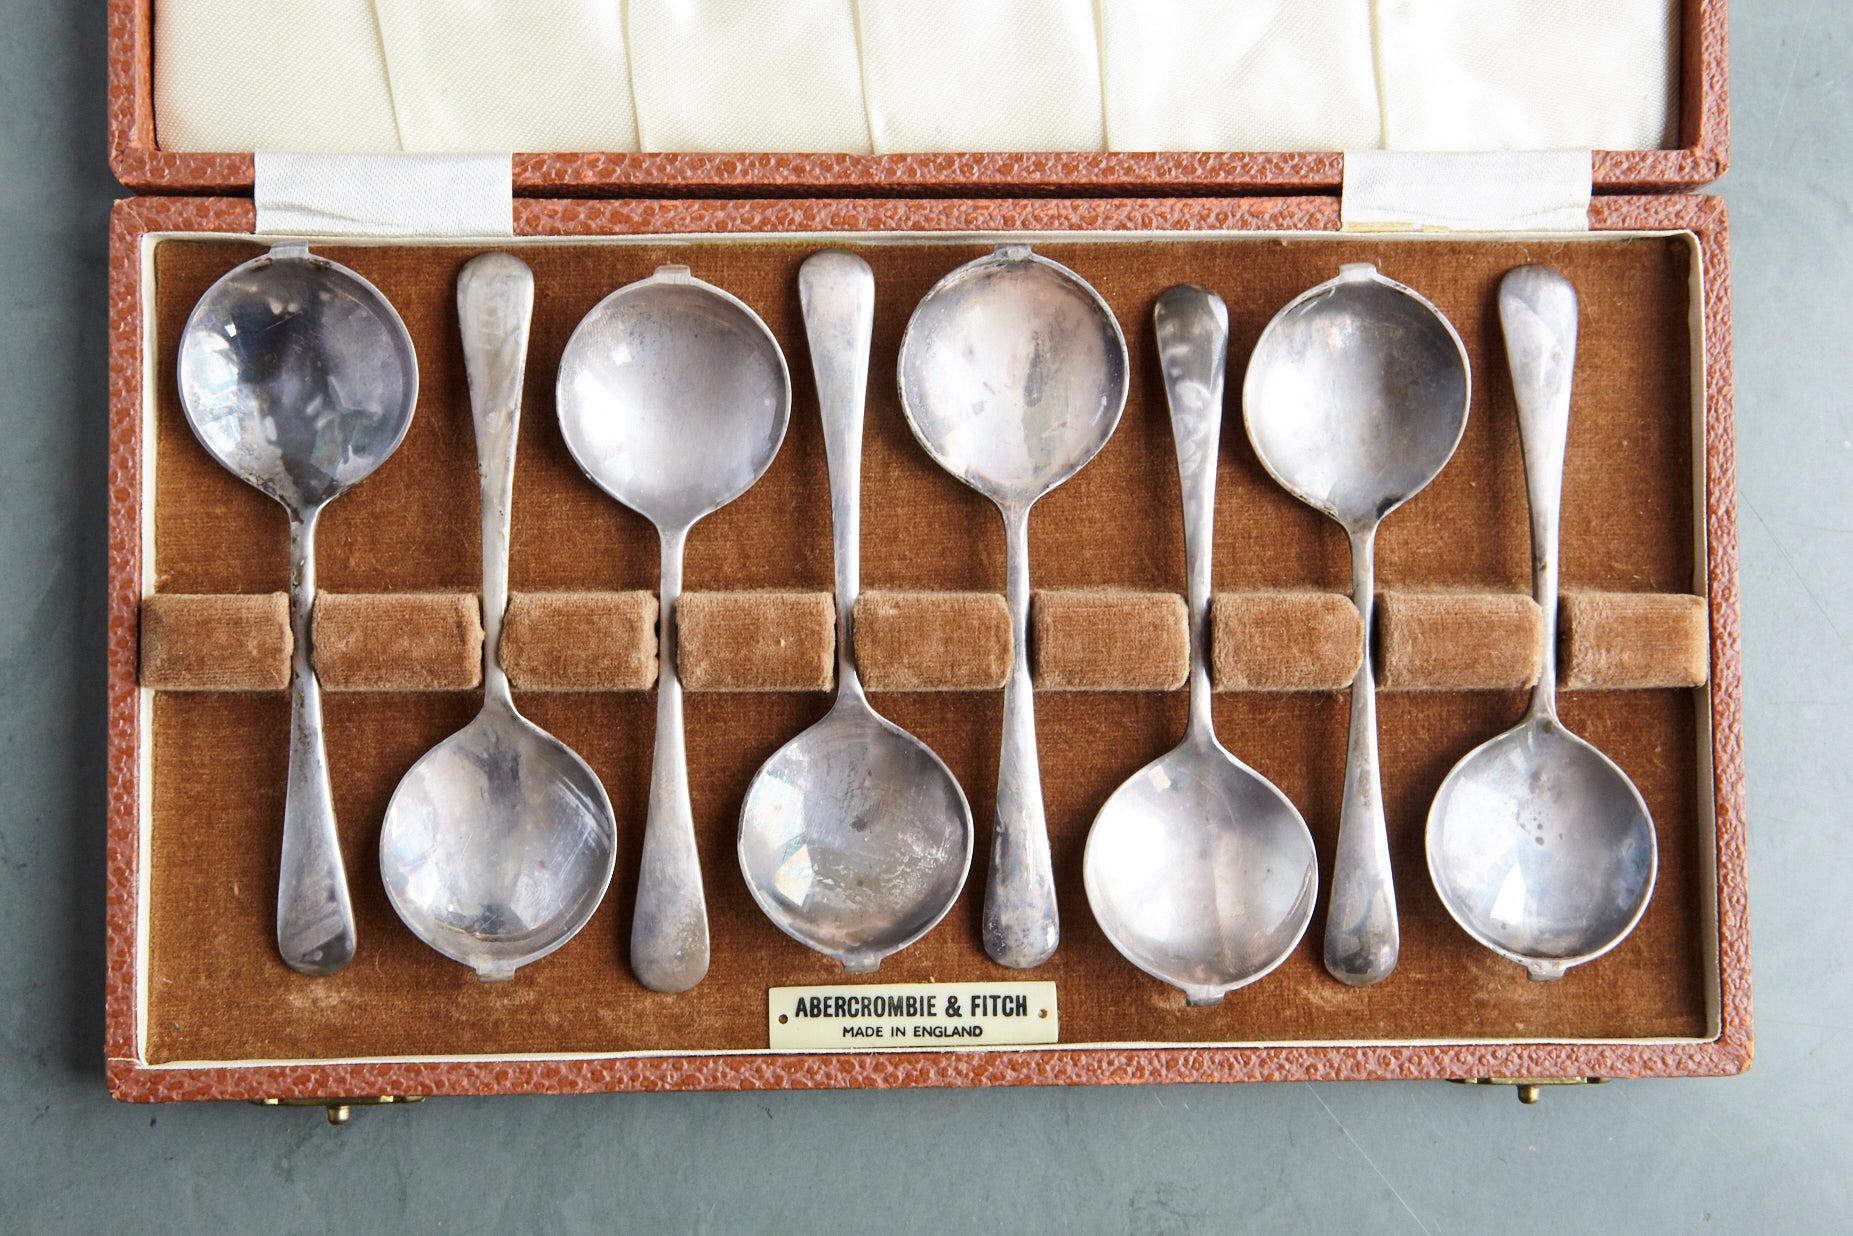 Lovely set of 8 silver plate Abercrombie & Fitch England small cafe diable spoons in a satin lined case, circa 1915s.
They are marked Abercrombie & Fitch - Made in England on the back as well on small plate in the satin lined box. 
There is a